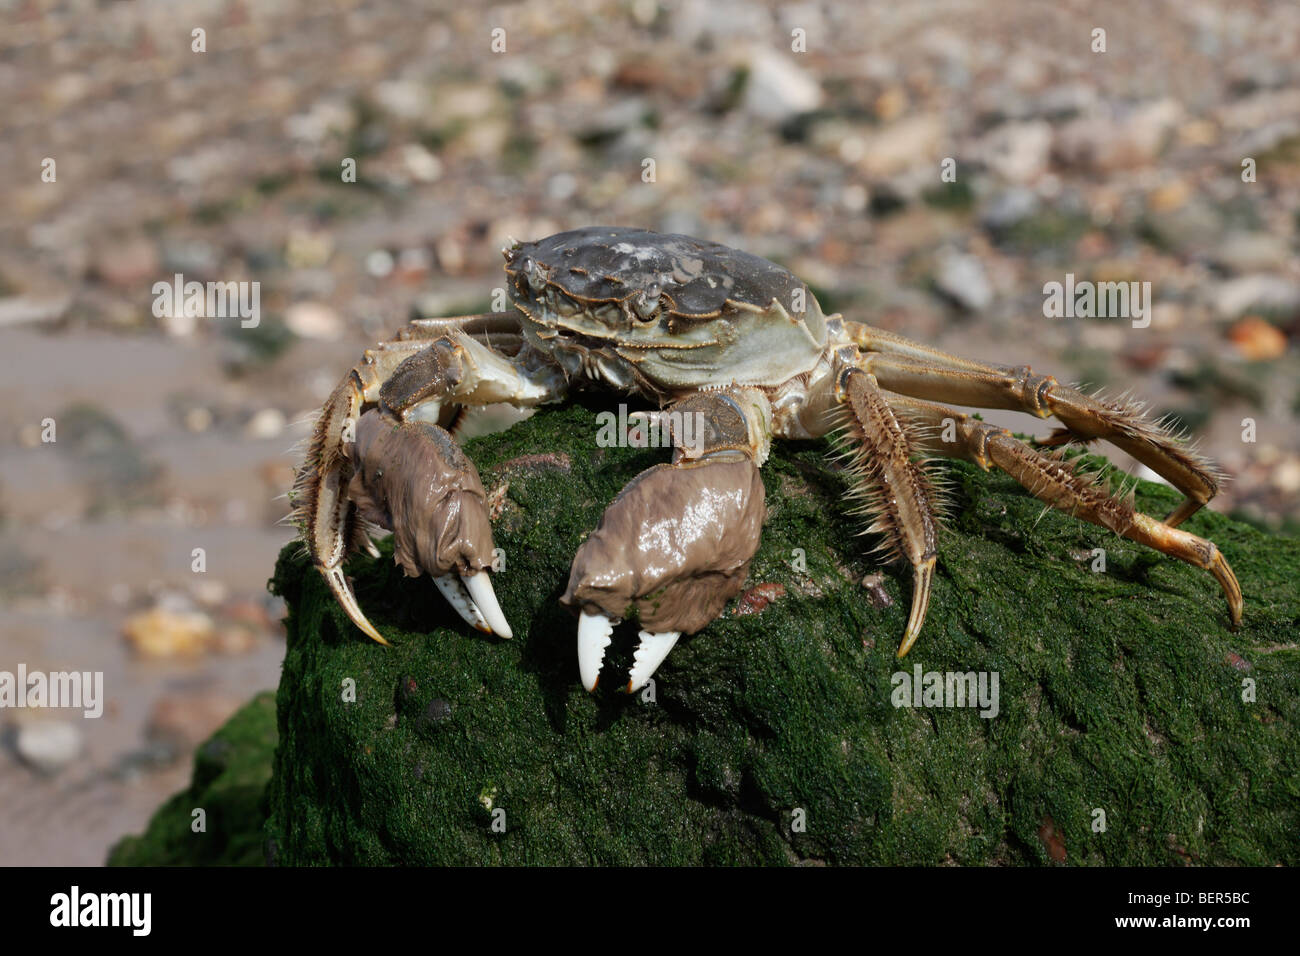 Crabe chinois, Eriocheir sinensis, Thames, Londres, octobre 2009 Banque D'Images